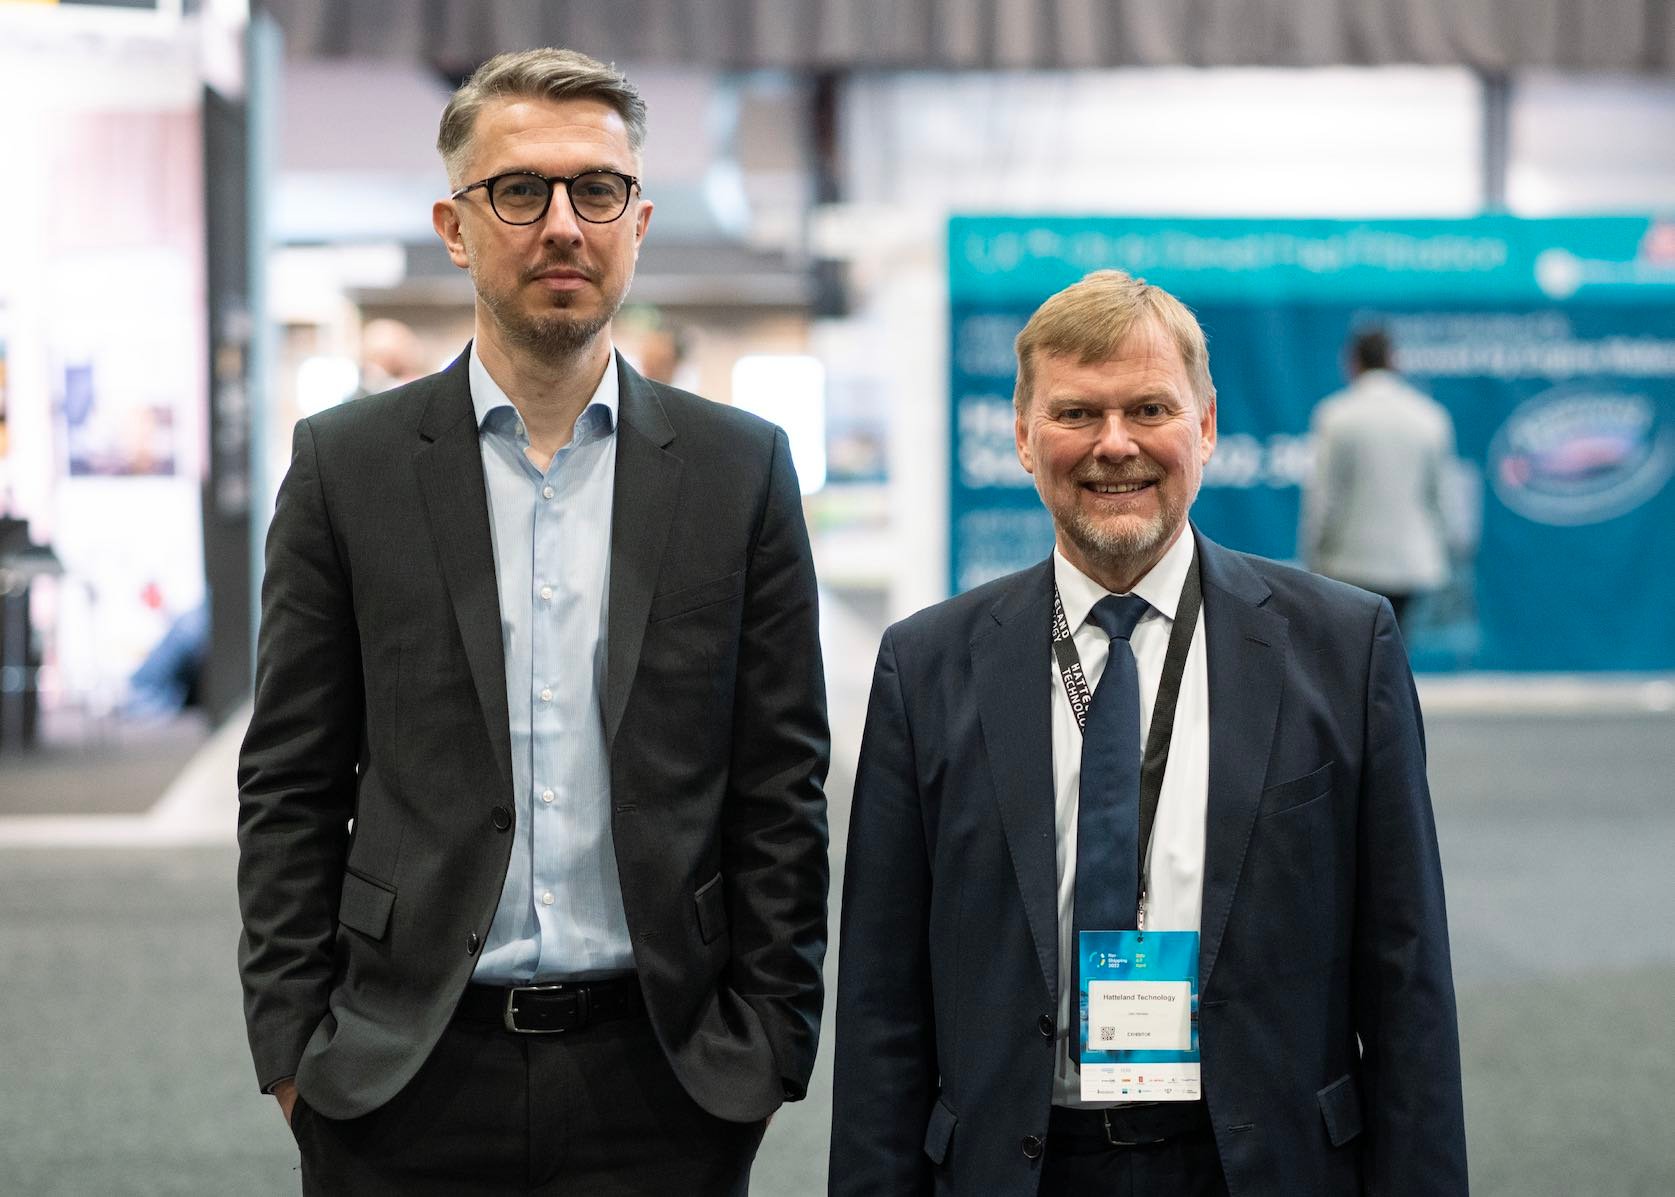 Captain Jan Hansen and Mr. Jakub Kwiatowski from Hatteland Technology, at Nor-Shipping 2022. They are both wearing suits, and are facing the camera. 